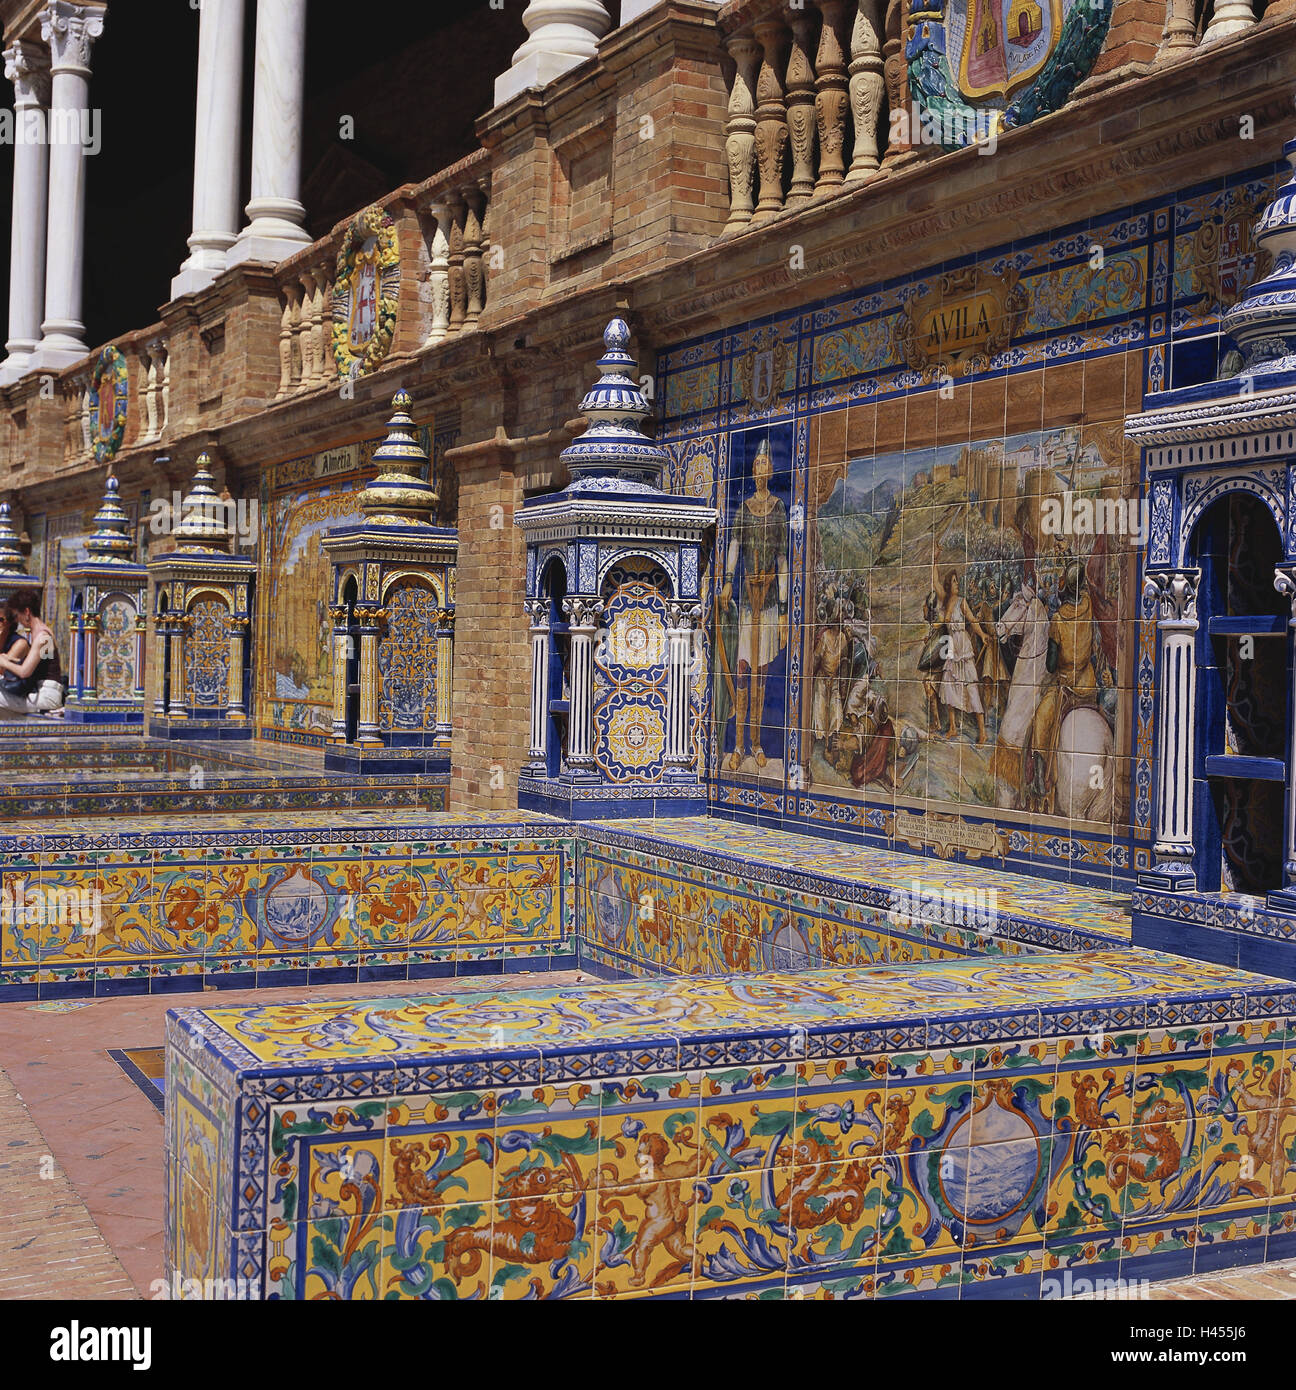 Spain, Andalusia, Seville, plaza Espana, building, semicircle, Azulejos, Europe, town, destination, place of interest, space, architecture, outside, people, tourism, pillars, Mosaike, tile pictures, tiles, tile pictures, tiles, paints, painting, pictures, typically for country, Stock Photo